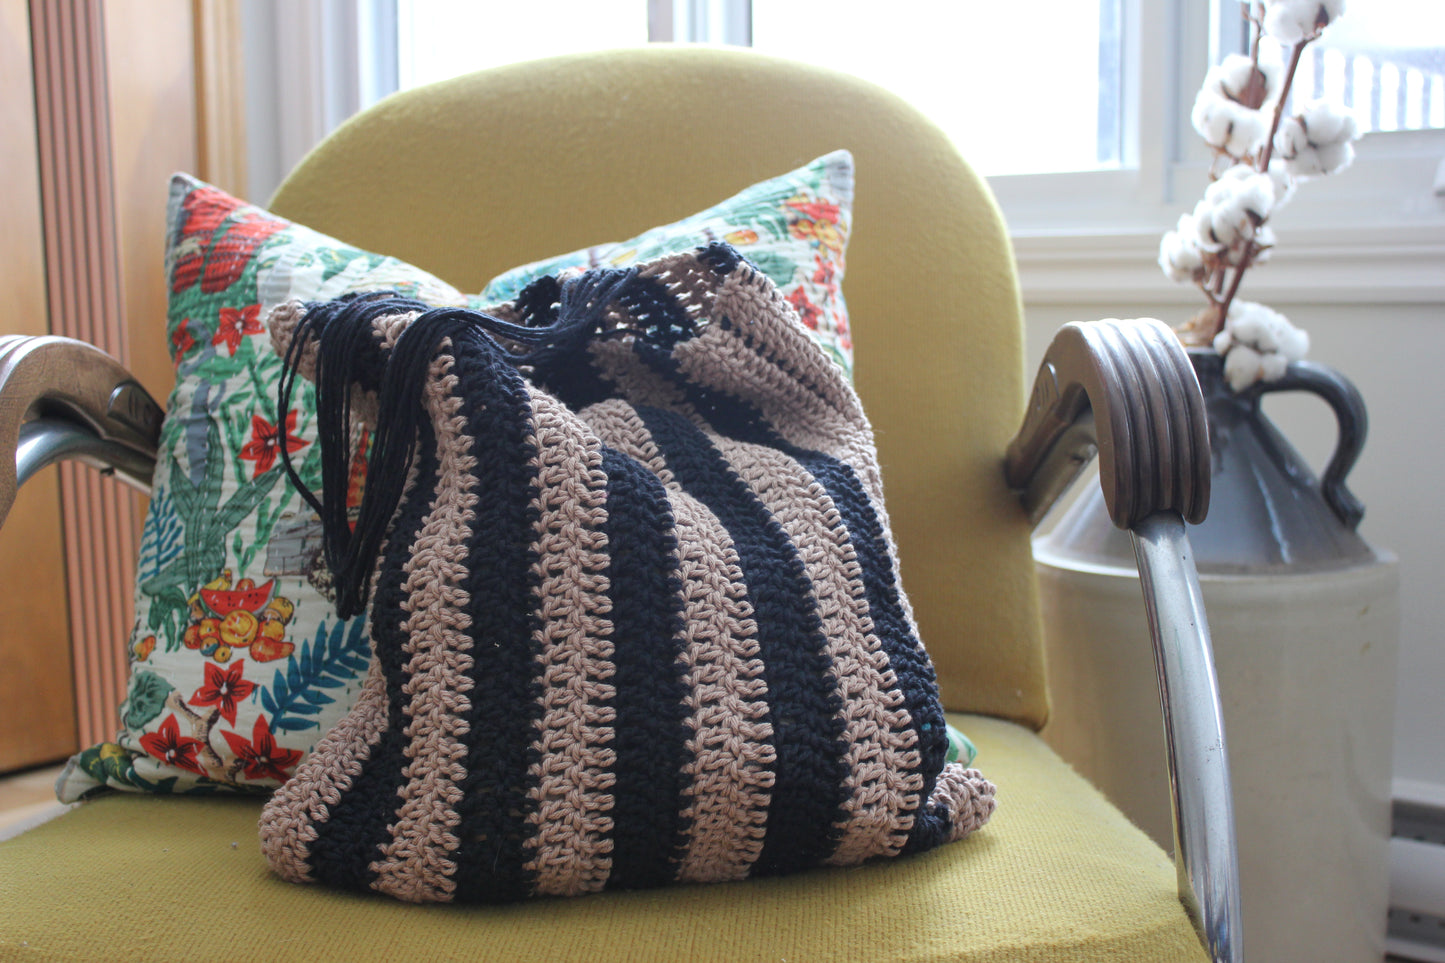 The Striped Bag Pattern